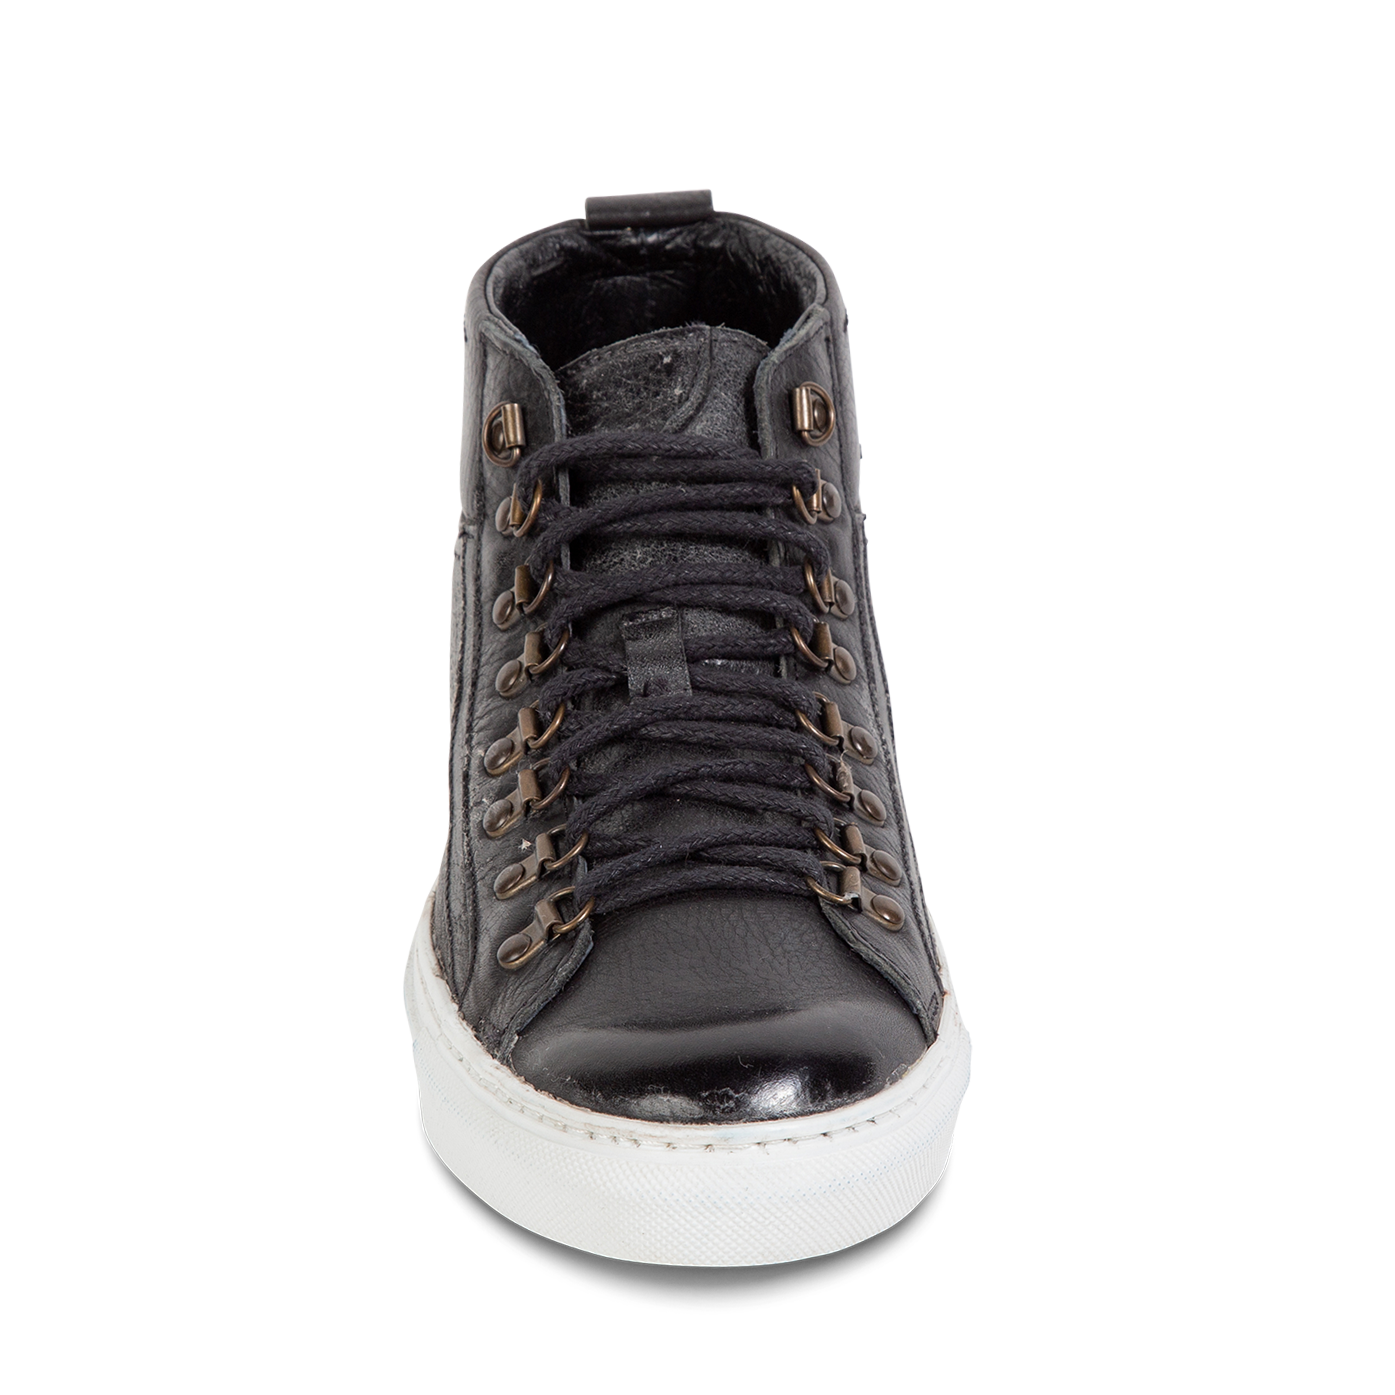 Front view showing adjustable lacing with brass hardware and leather tongue on FREEBIRD men's Shelby black shoe